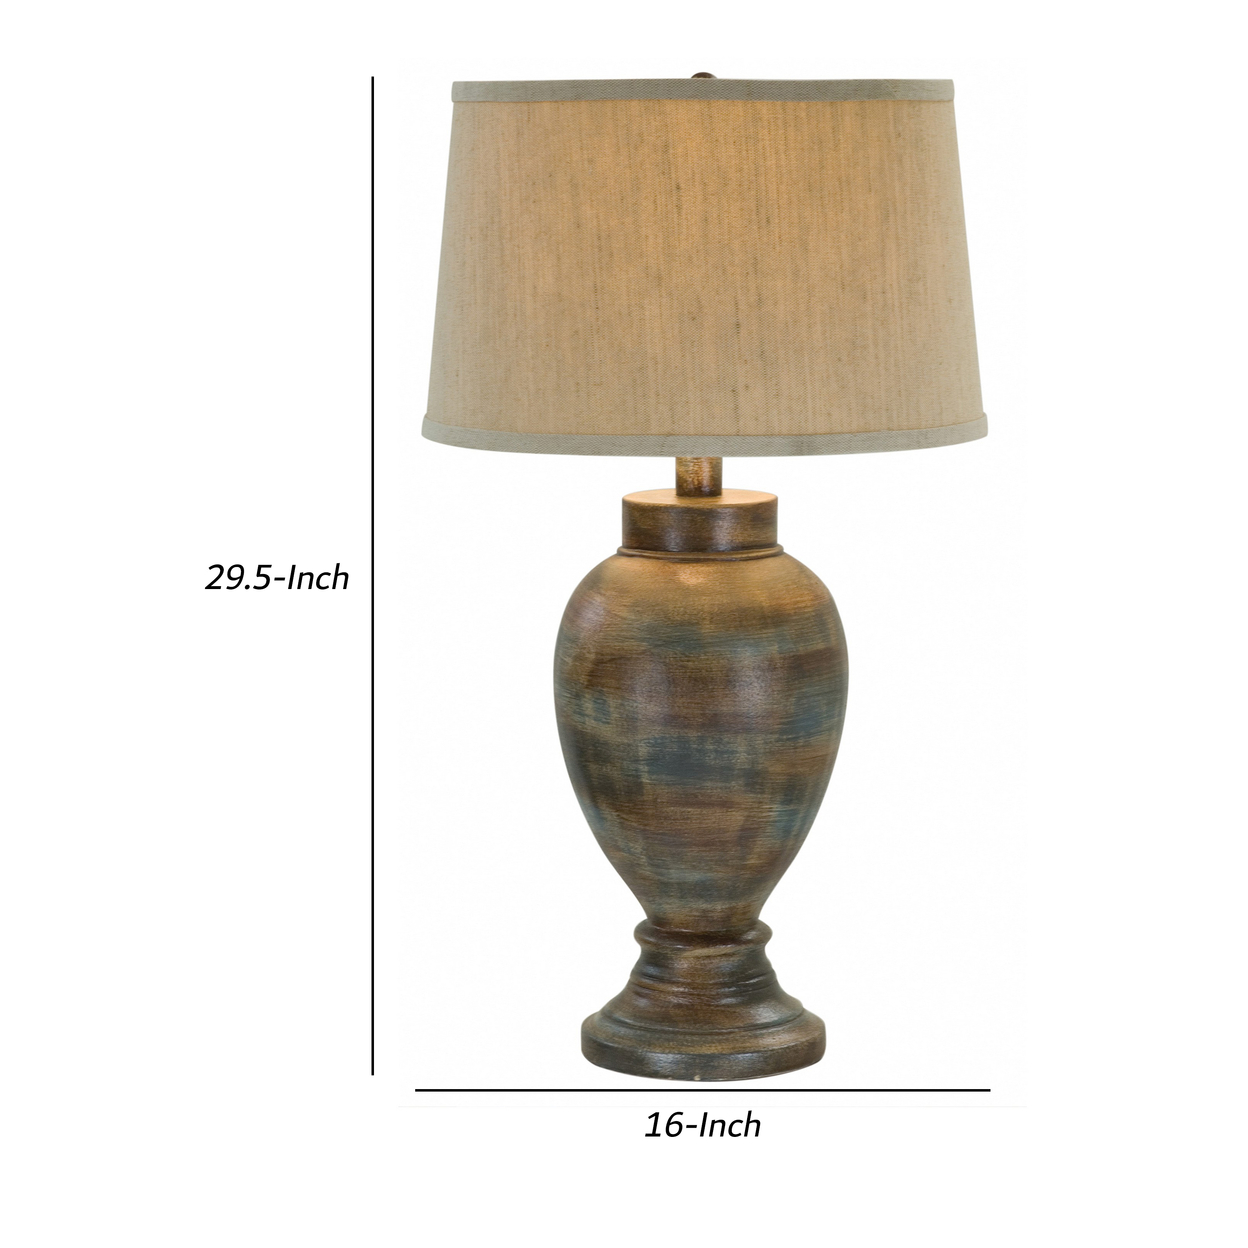 30 Inch Hydrocal Table Lamp, Drum Shade, Classic Urn Base, Brown And Blue- Saltoro Sherpi